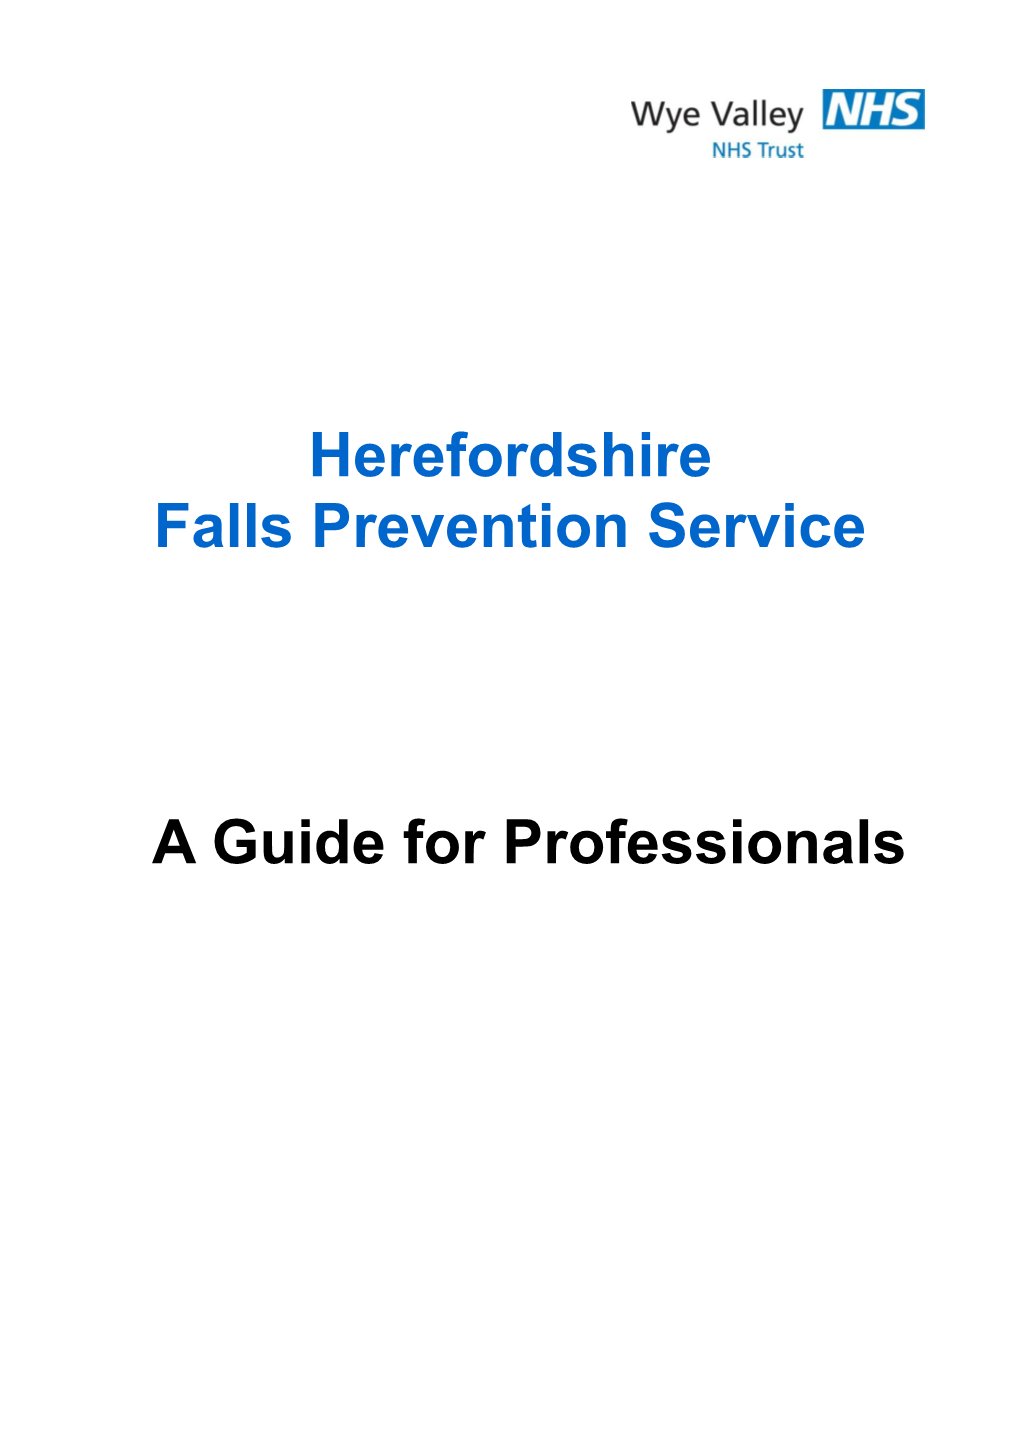 Herefordshire Falls Prevention Service a Guide for Professionals